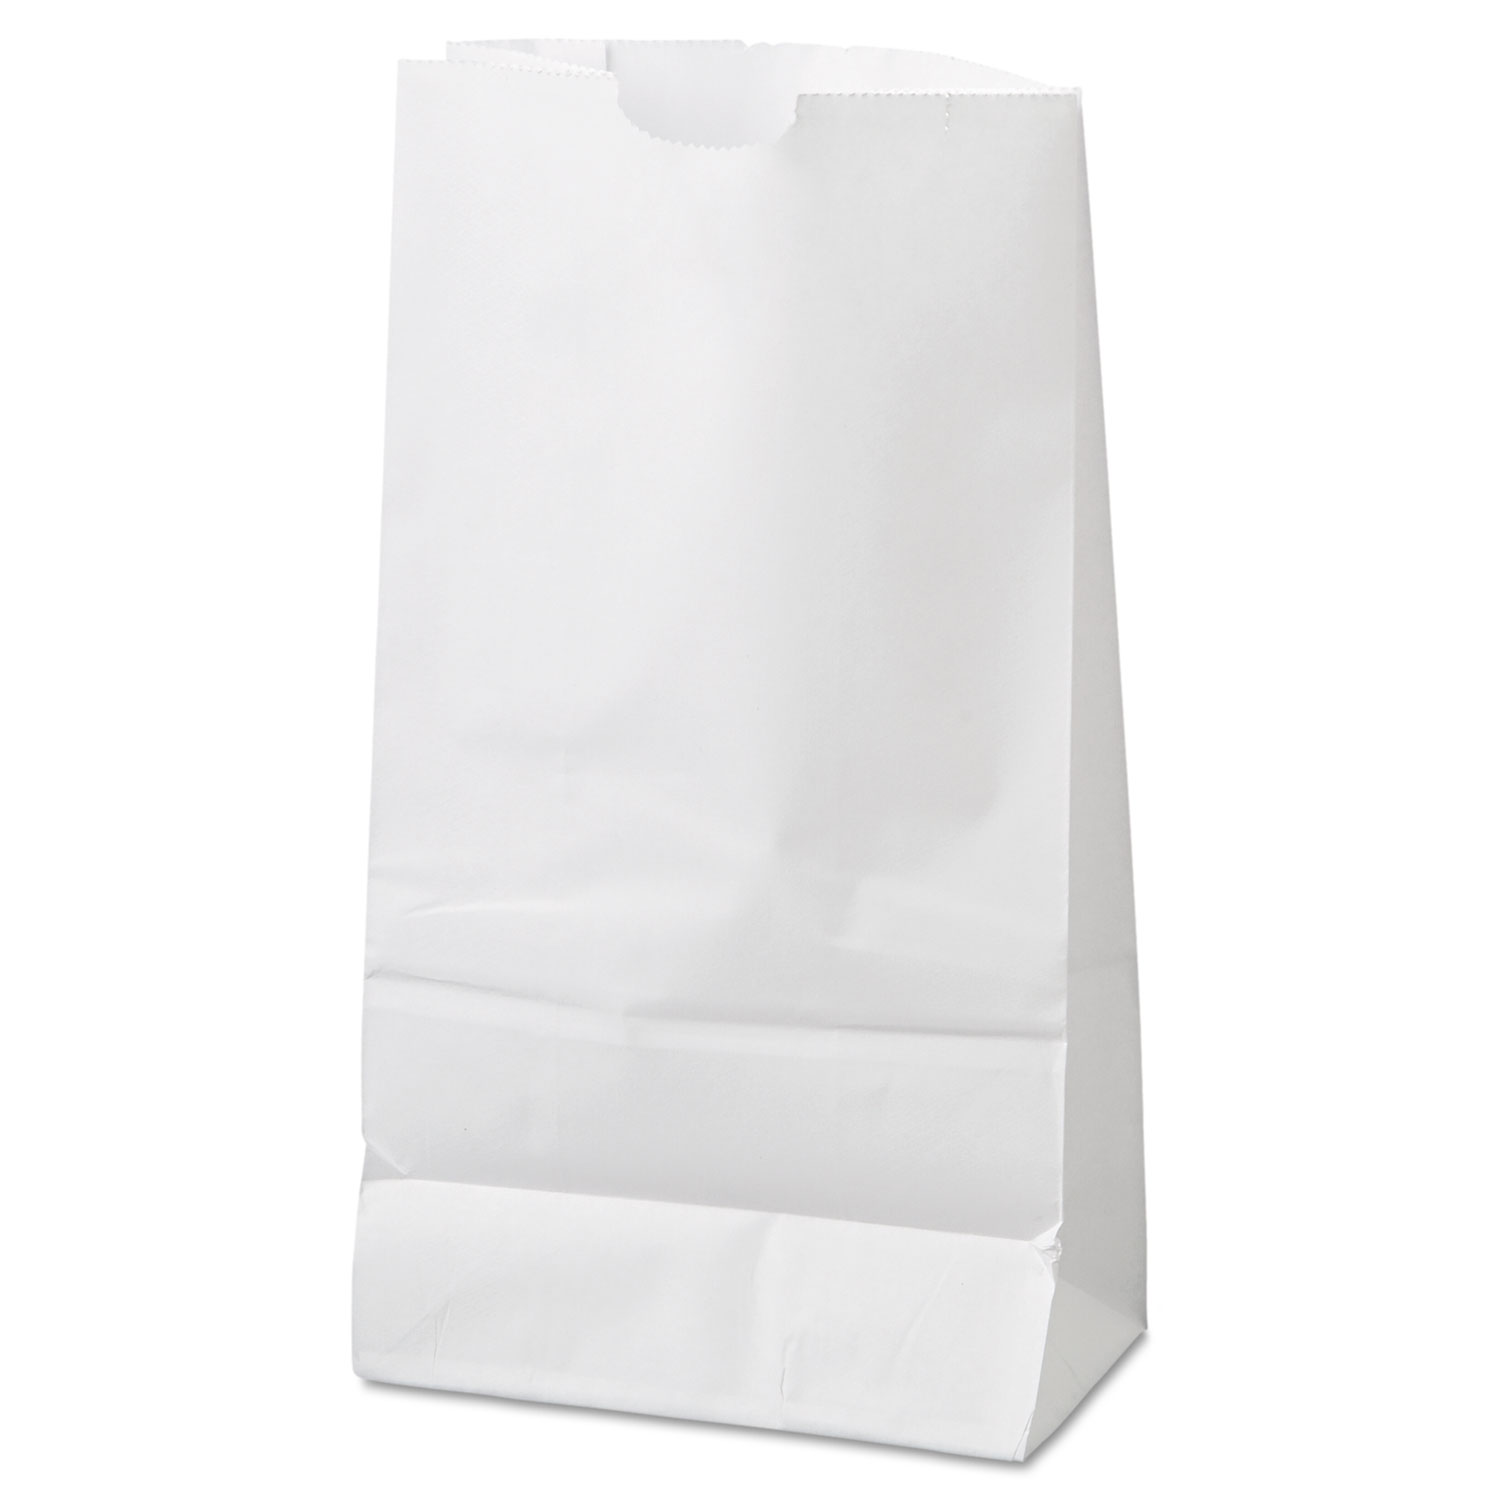 General Grocery Paper Bags, 35 lbs Capacity, #10, 6.31w x 4.19d x 13.38h, White, 500 Bags